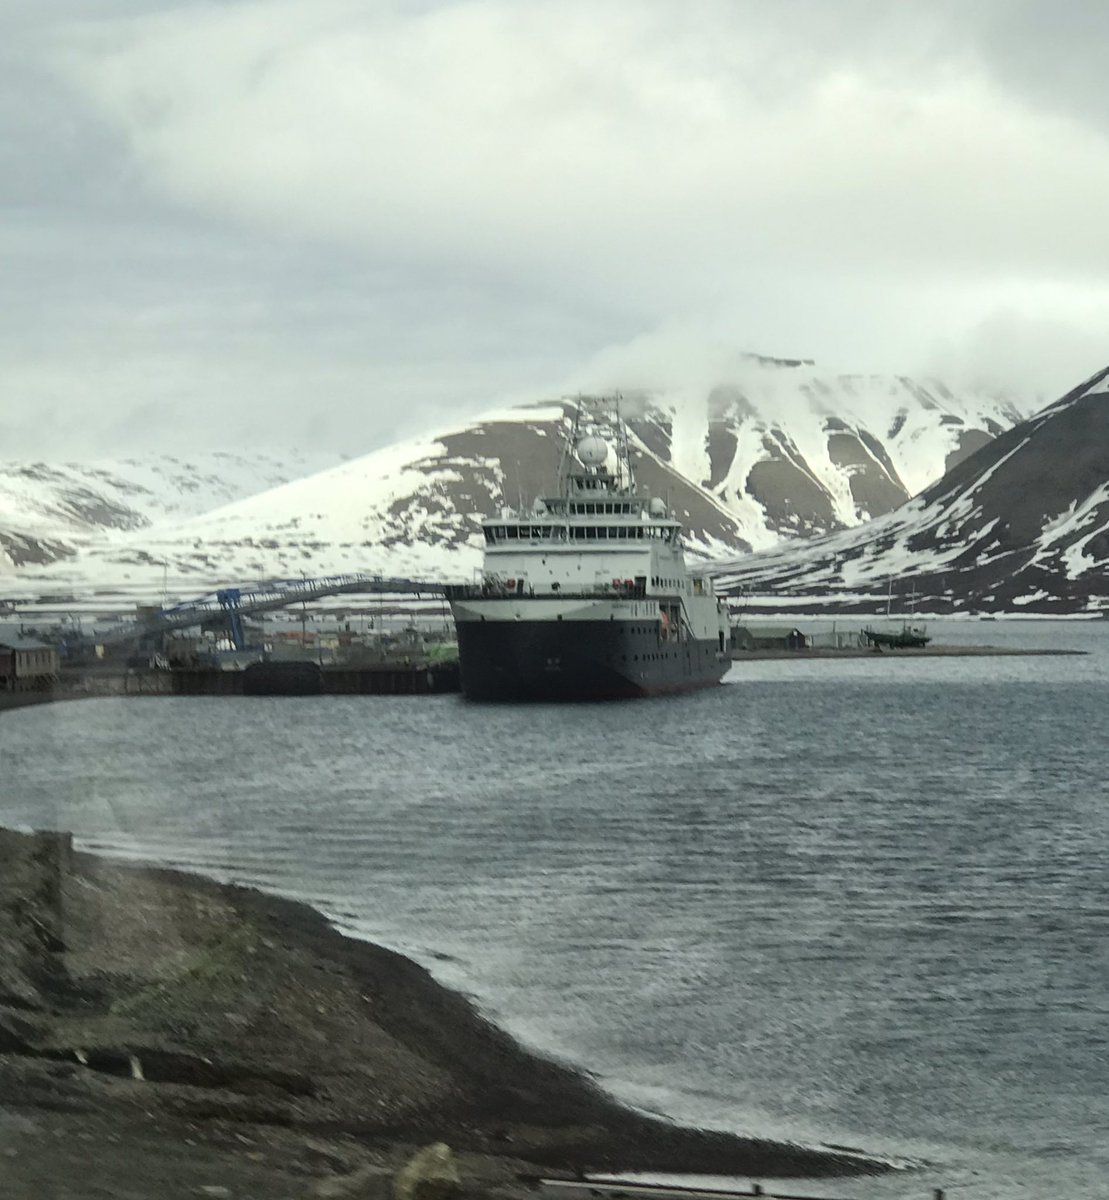 A surprise sighting of the ice breaking vessel #RVKronprinsHaakon in Longyearbyen. Never in port when you need her, suddenly there when you least expect. An important @ICOS_RI ocean station and soon with atmospheric measurements for #ReGAME